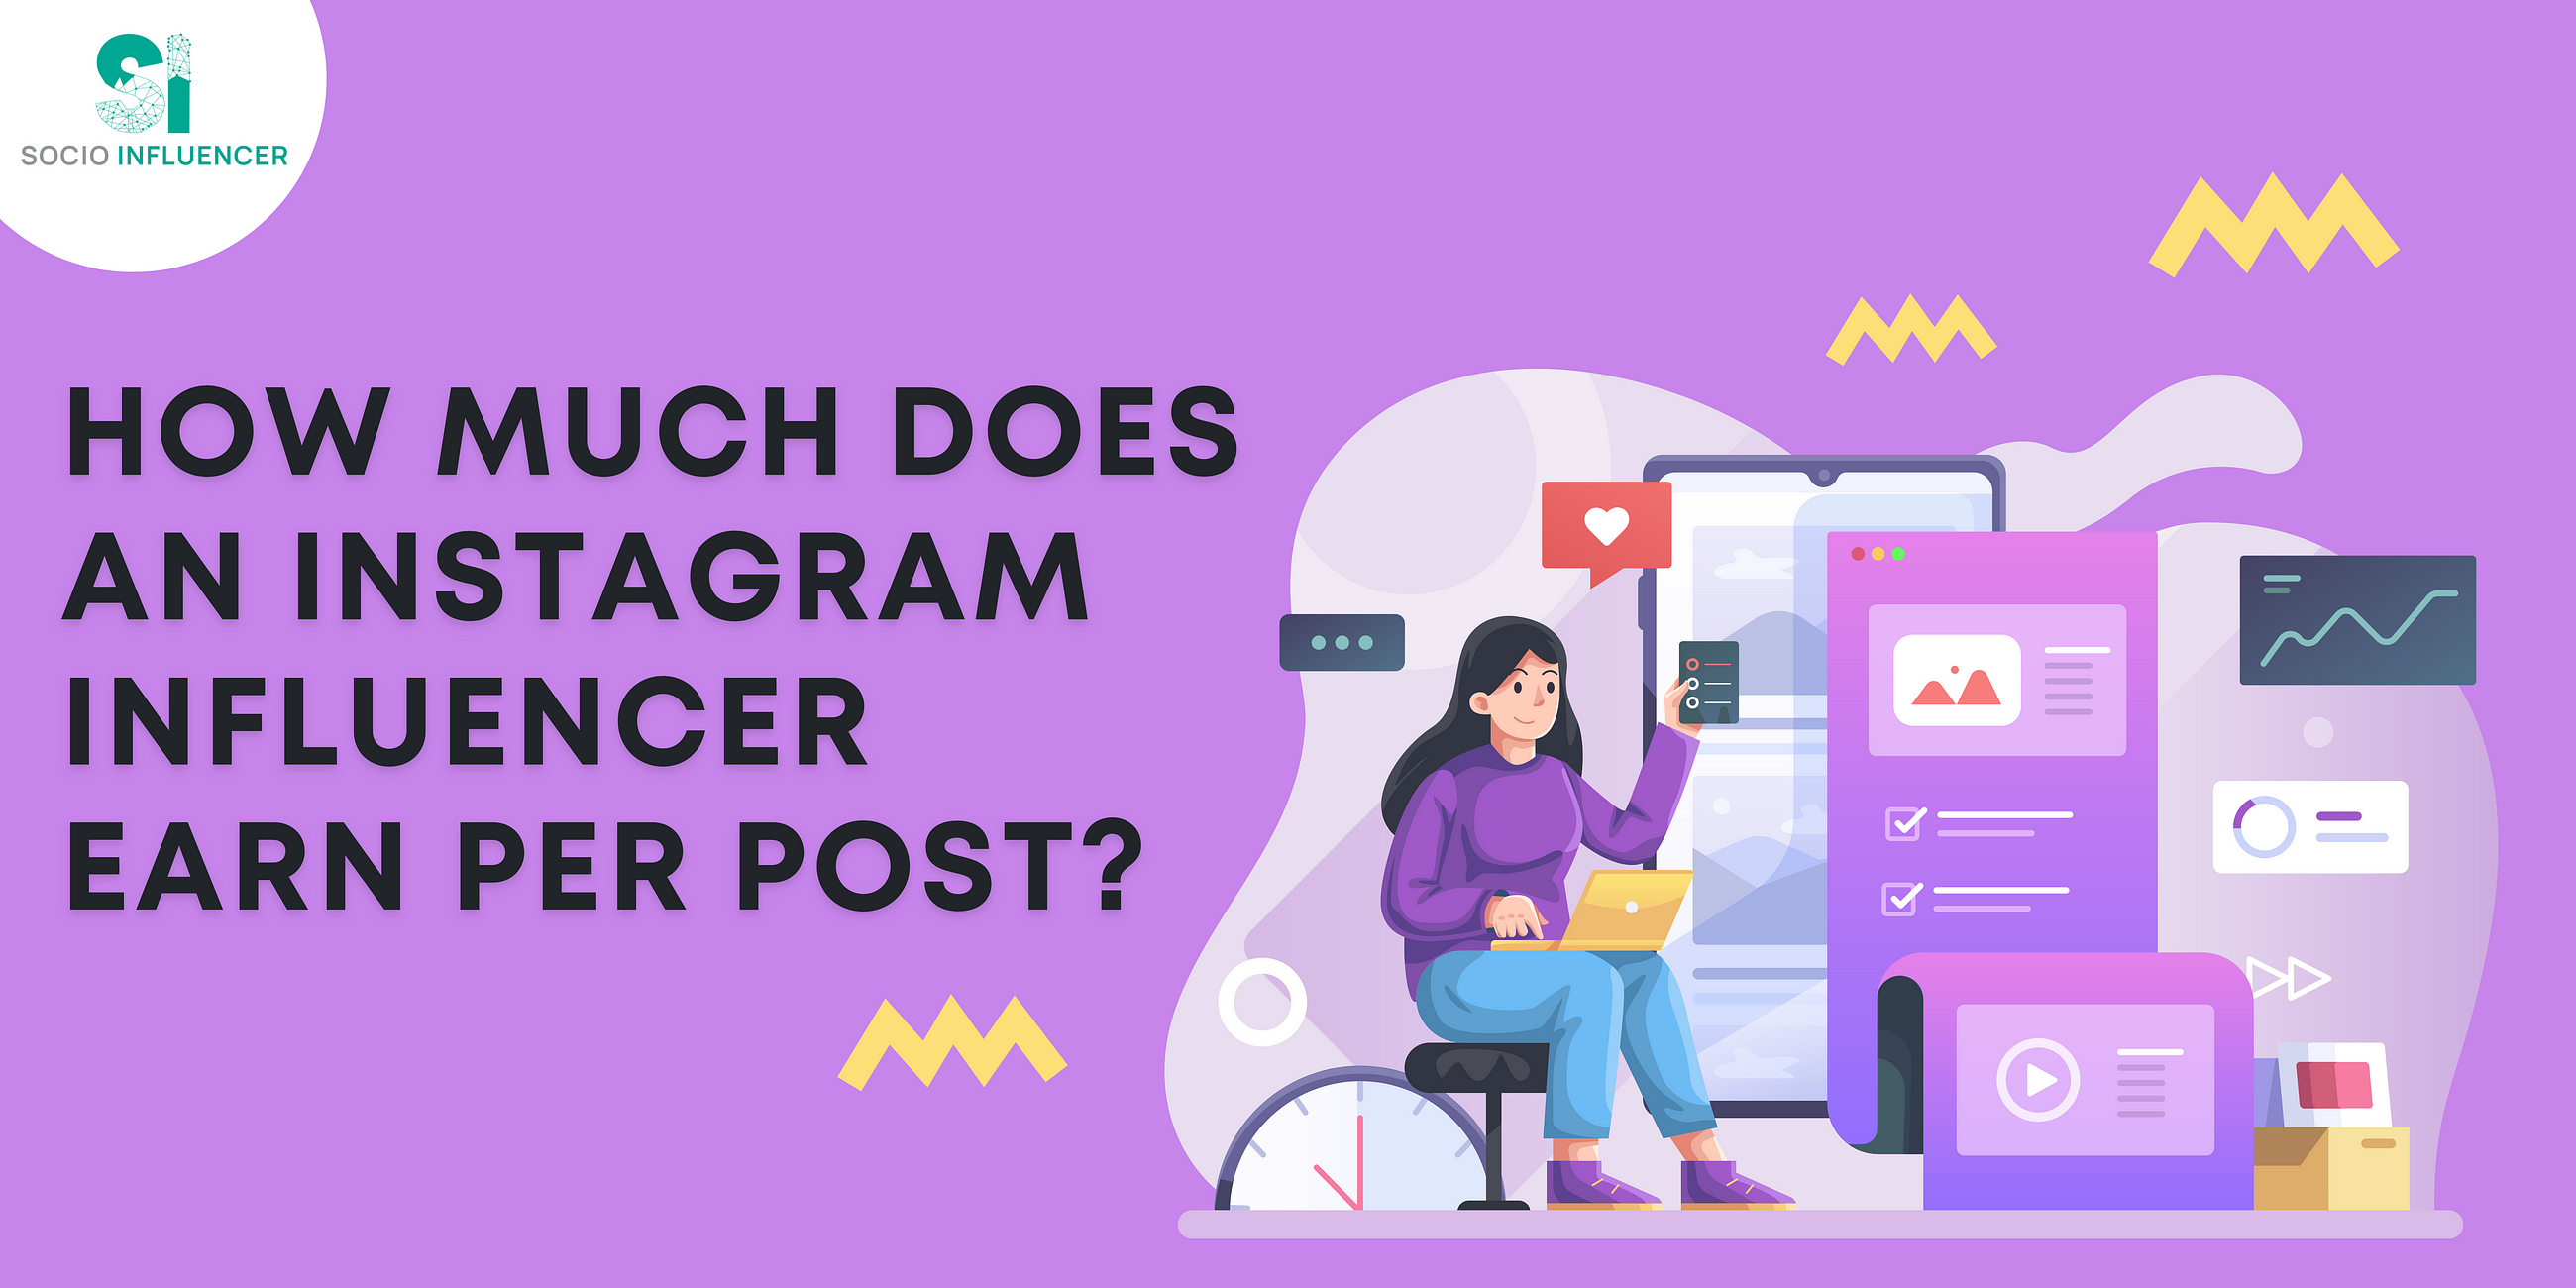 What Is the Average Income of an Instagram Influencer | Socio Influencer